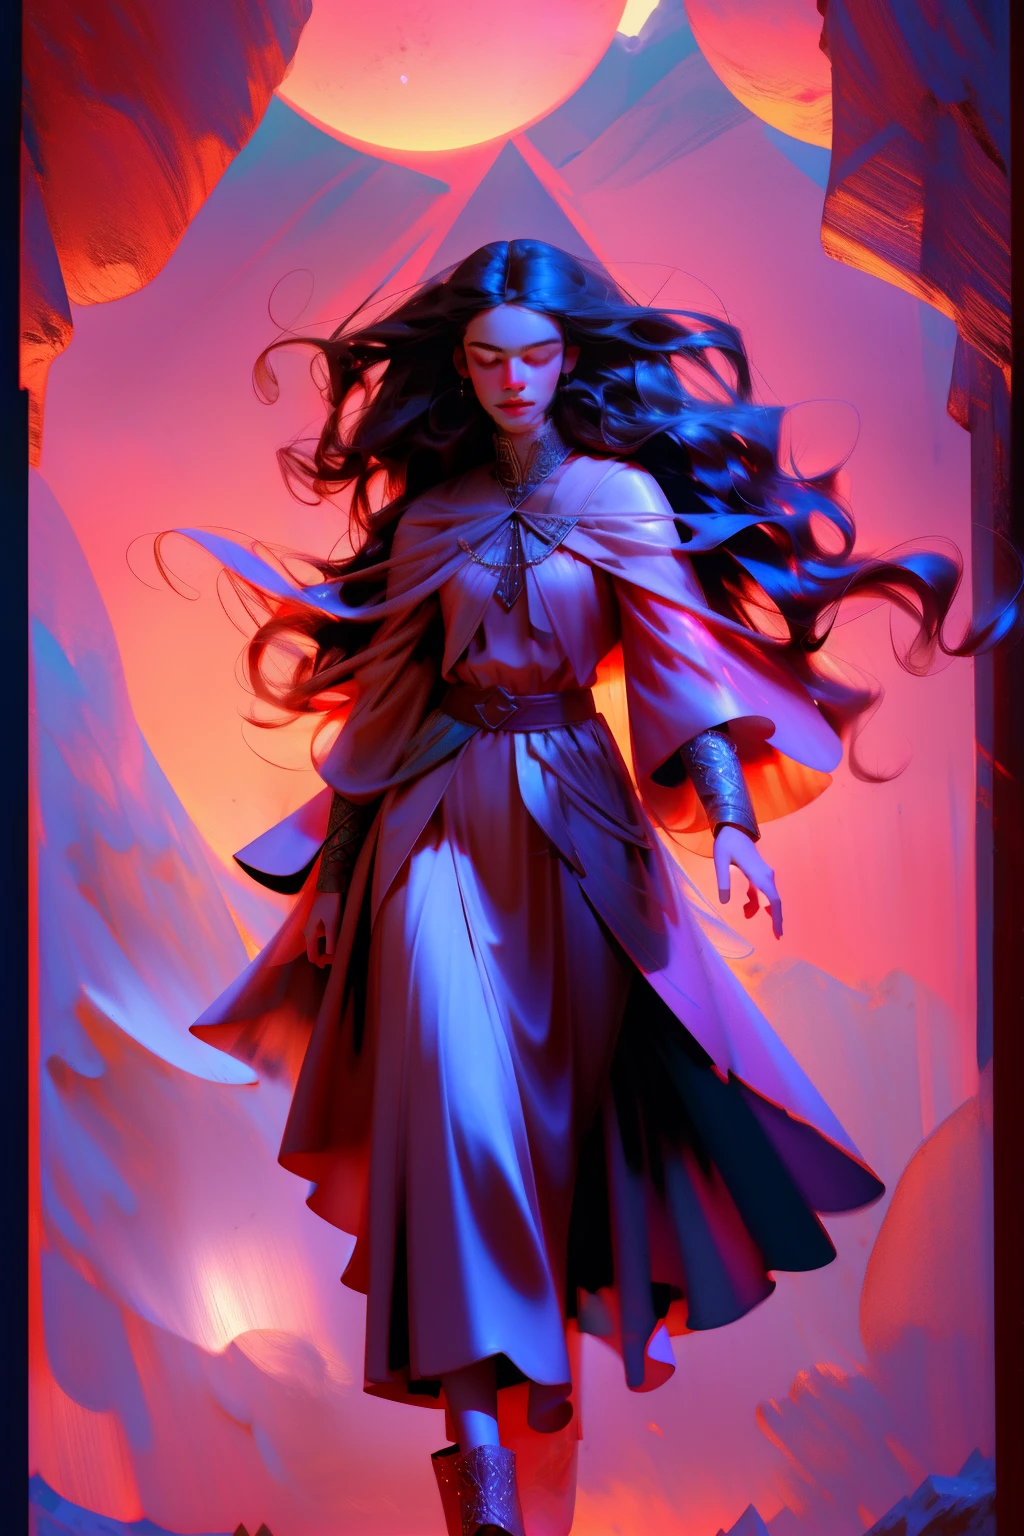 (best quality,4k,8k,highres,masterpiece:1.2),ultra-detailed,(realistic,photorealistic,photo-realistic:1.37),long black hair,flowing,levitating,beautiful detailed hair,witch,rpg style,magical,powerful,illustration,moonlight,spells,cloak,enchanted forest,mystical creatures,glowing eyes,nightfall,moonlit sky,aura,floating crystals,jewel-toned colors,mysterious atmosphere,fantastical elements,storytelling composition,epic fantasy journey,sorcery,adventure,heroine,portrait,character-focused,elaborate costume,mythical,legendary,ancient,ancestral magic,supernatural abilities,dark,ethereal,dramatic lighting,vibrant colors, warm colors